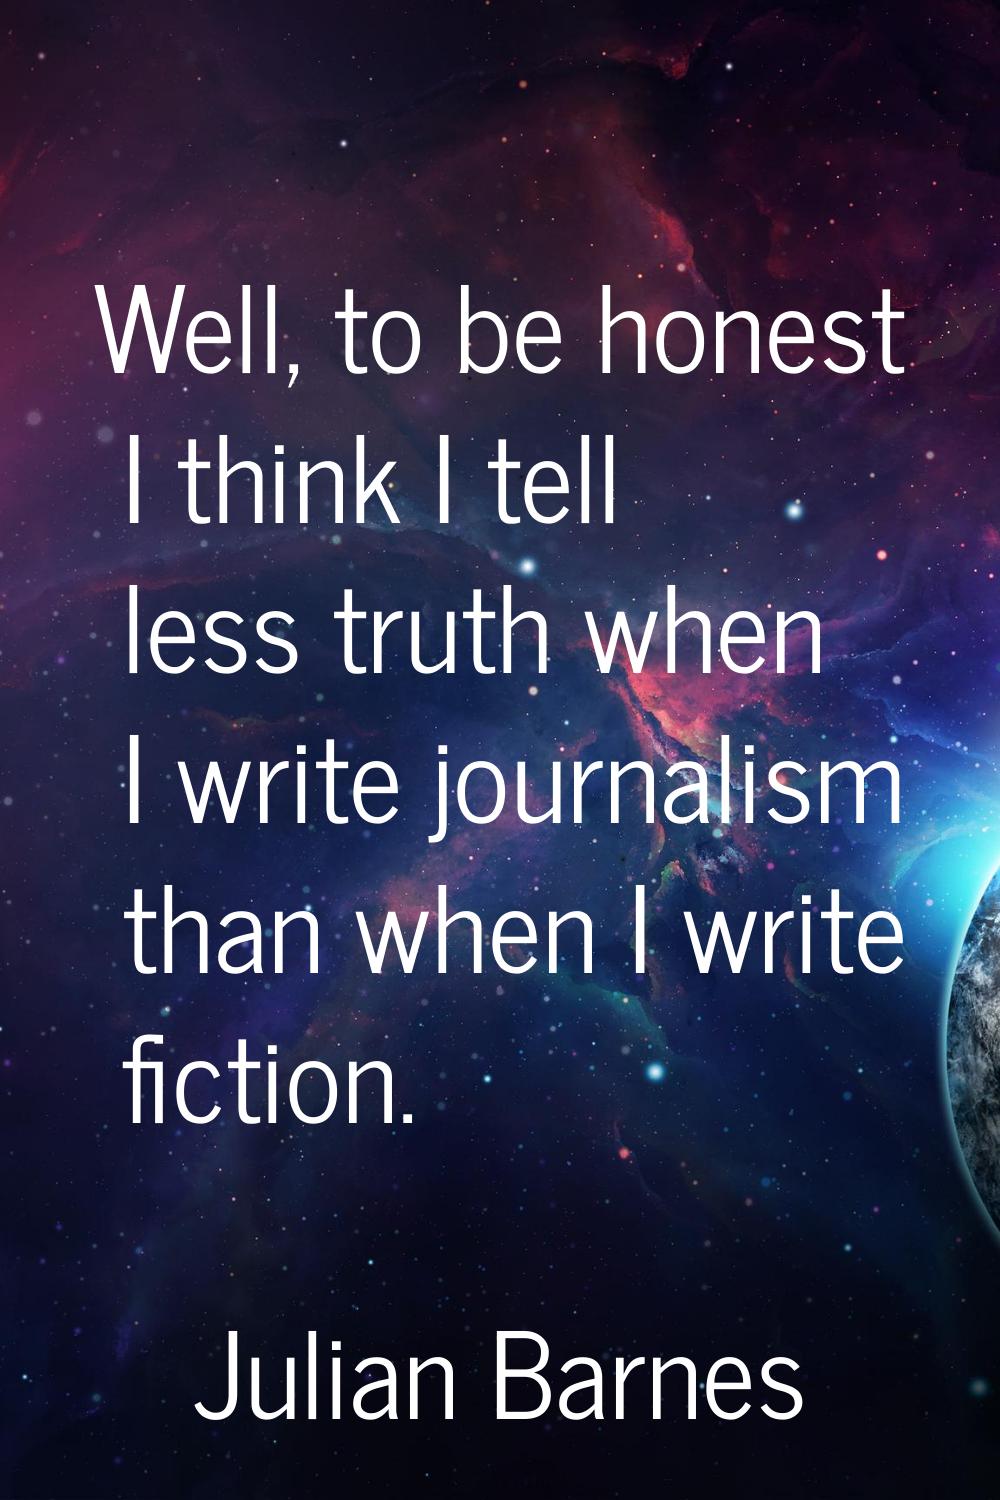 Well, to be honest I think I tell less truth when I write journalism than when I write fiction.